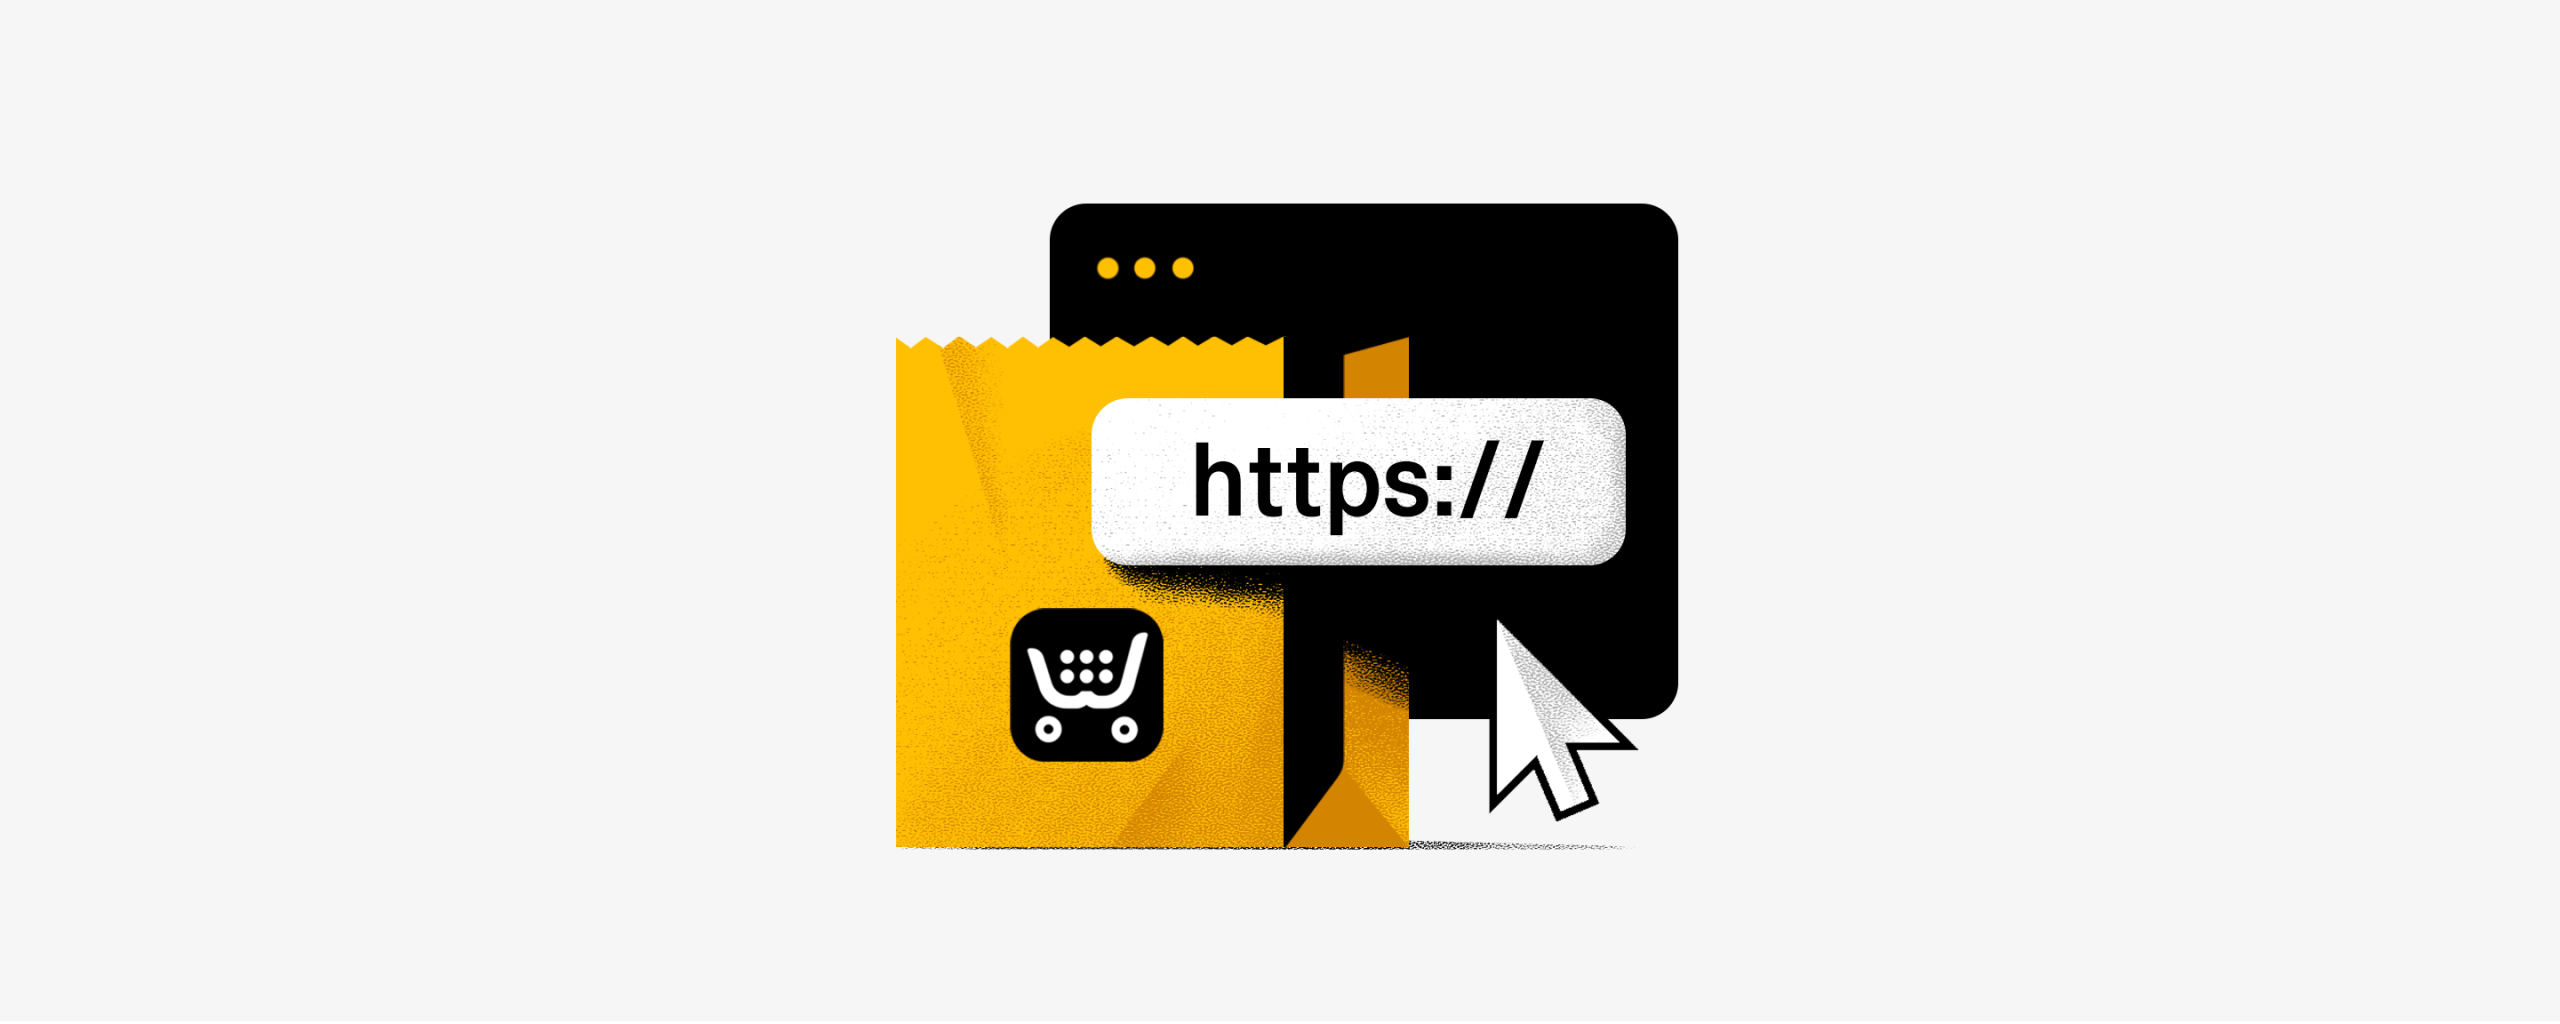 The Easiest Way to Buy a Domain for an Online Store